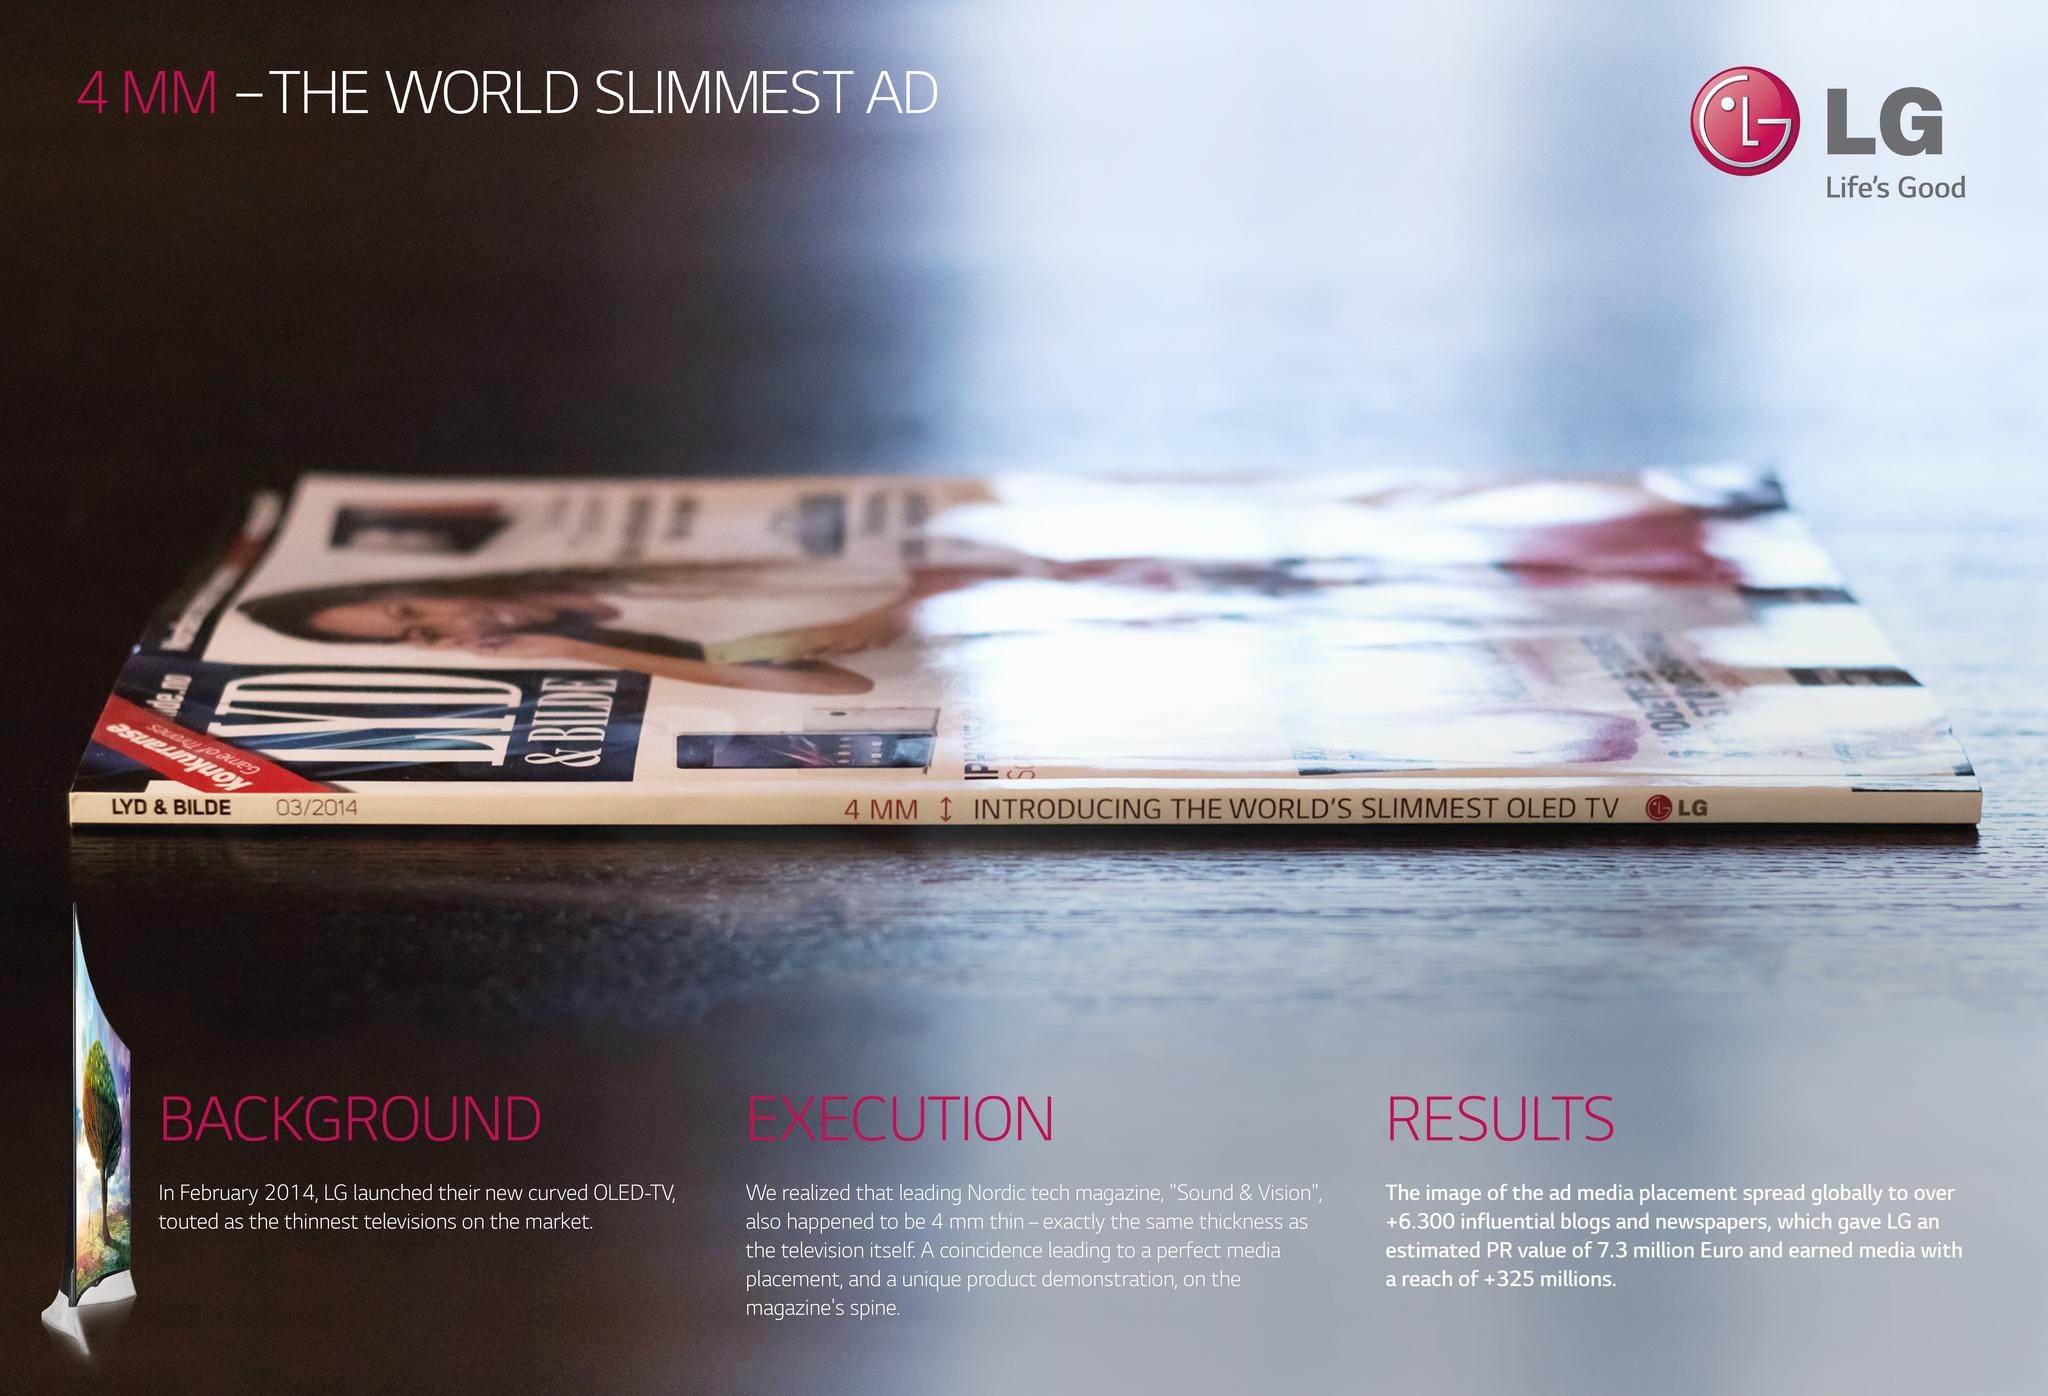 4 MM - THE WORLD'S SLIMMEST AD